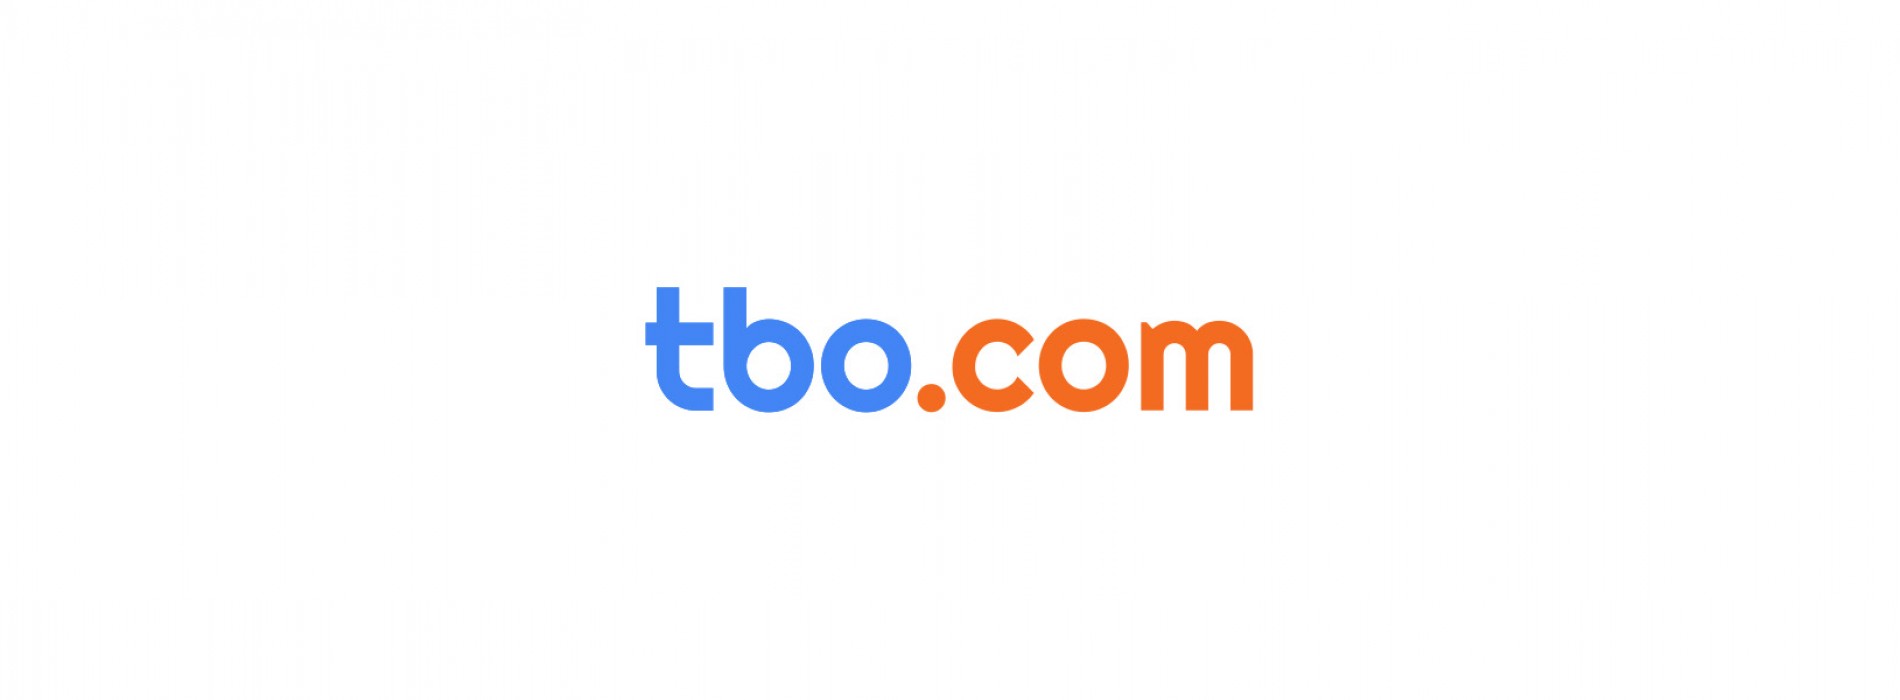 TBO Tek Limited, a global B2B travel technology company, announces the appointment of four independent directors to its Board